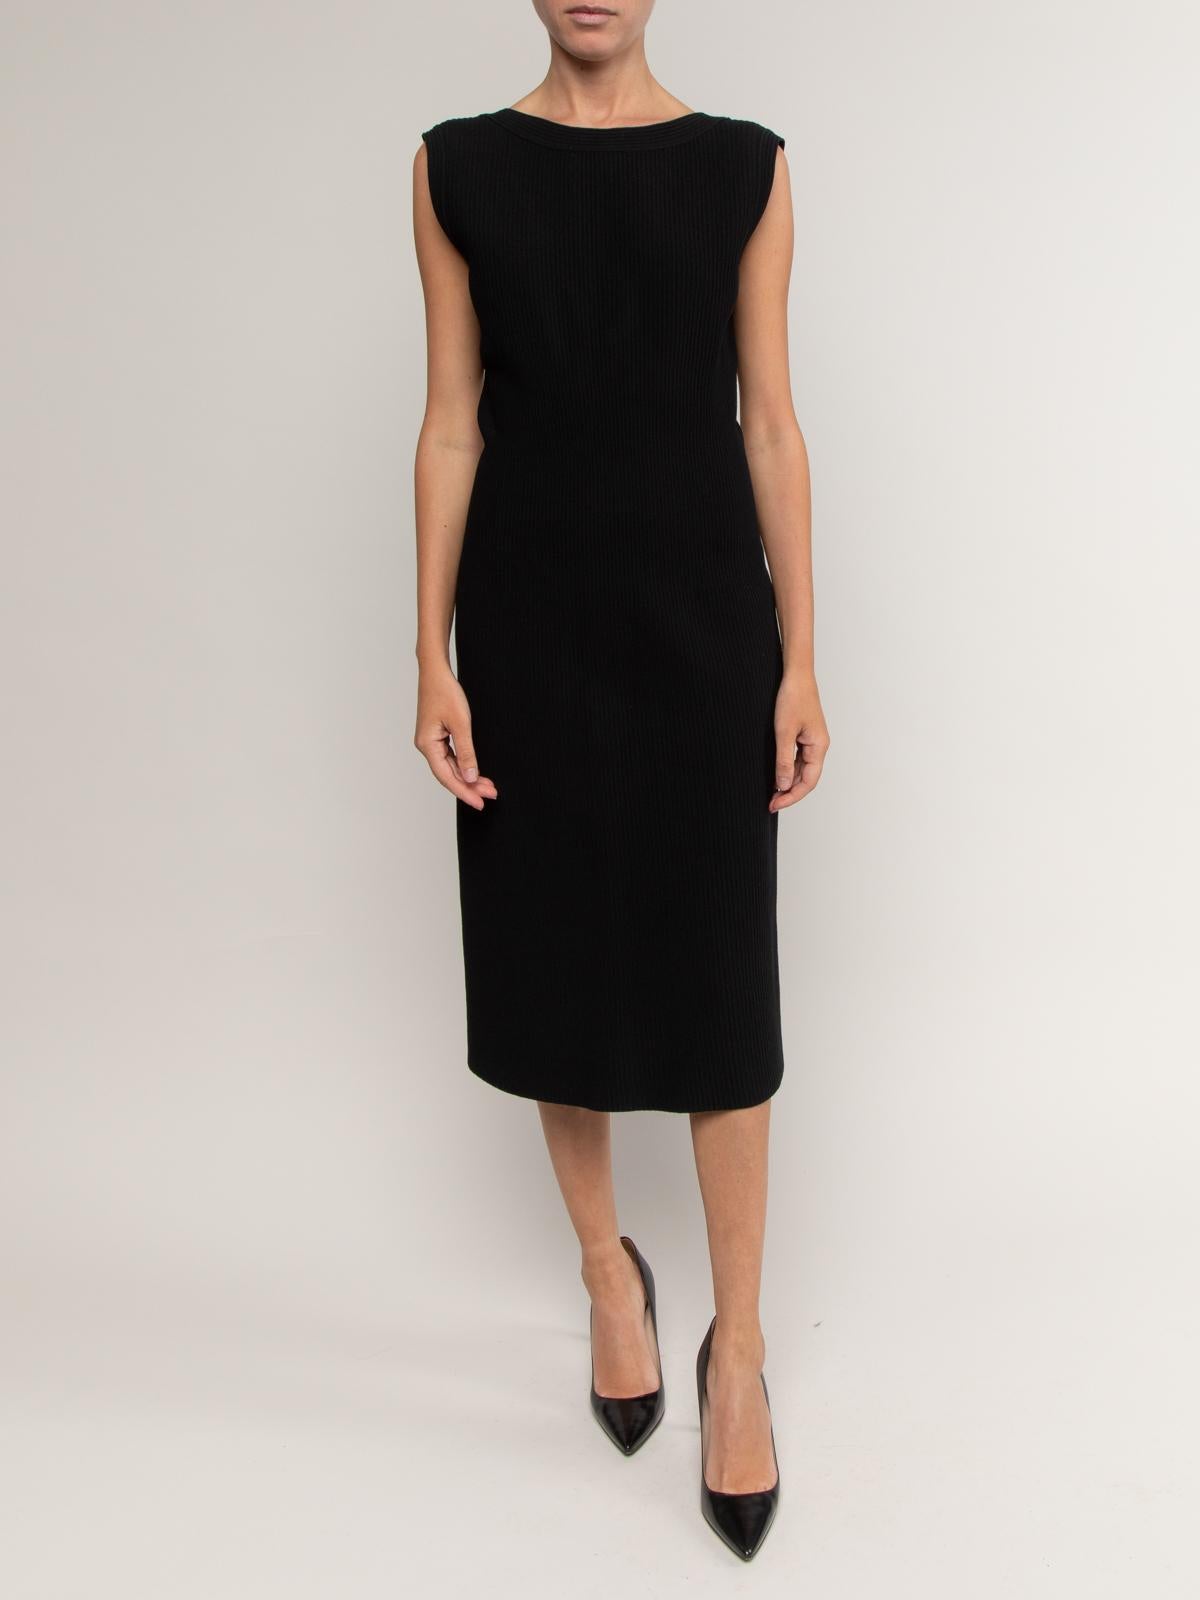 CONDITION is Very good. Minimal signs of wear to dress is evident. Some signs of wear to armpit trim on this used Alaia designer resale item. Details Colour - black Material - silk Fit - figure-hugging Sleeveless Neckline - round Hemline - knee